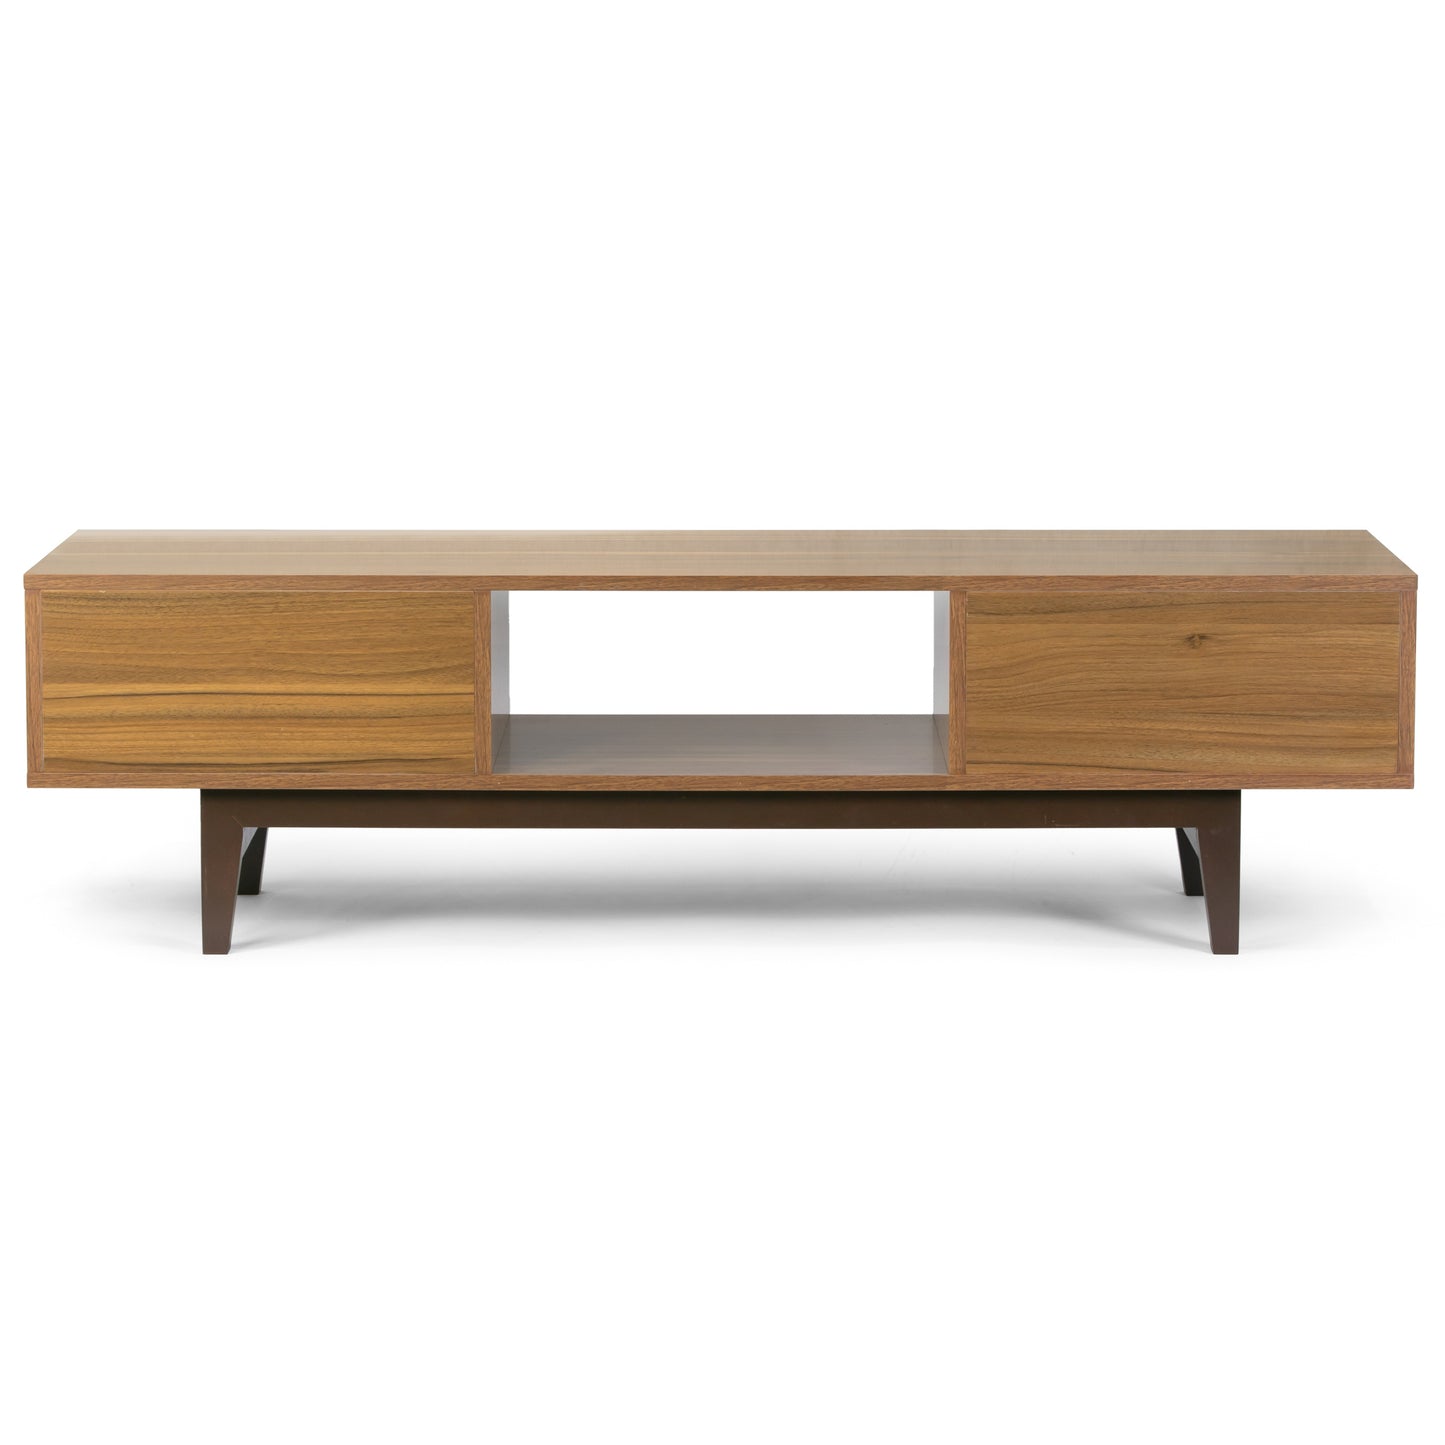 Alvin Scandinavian Style Walnut Finish TV Stand with Contrasting Drawers